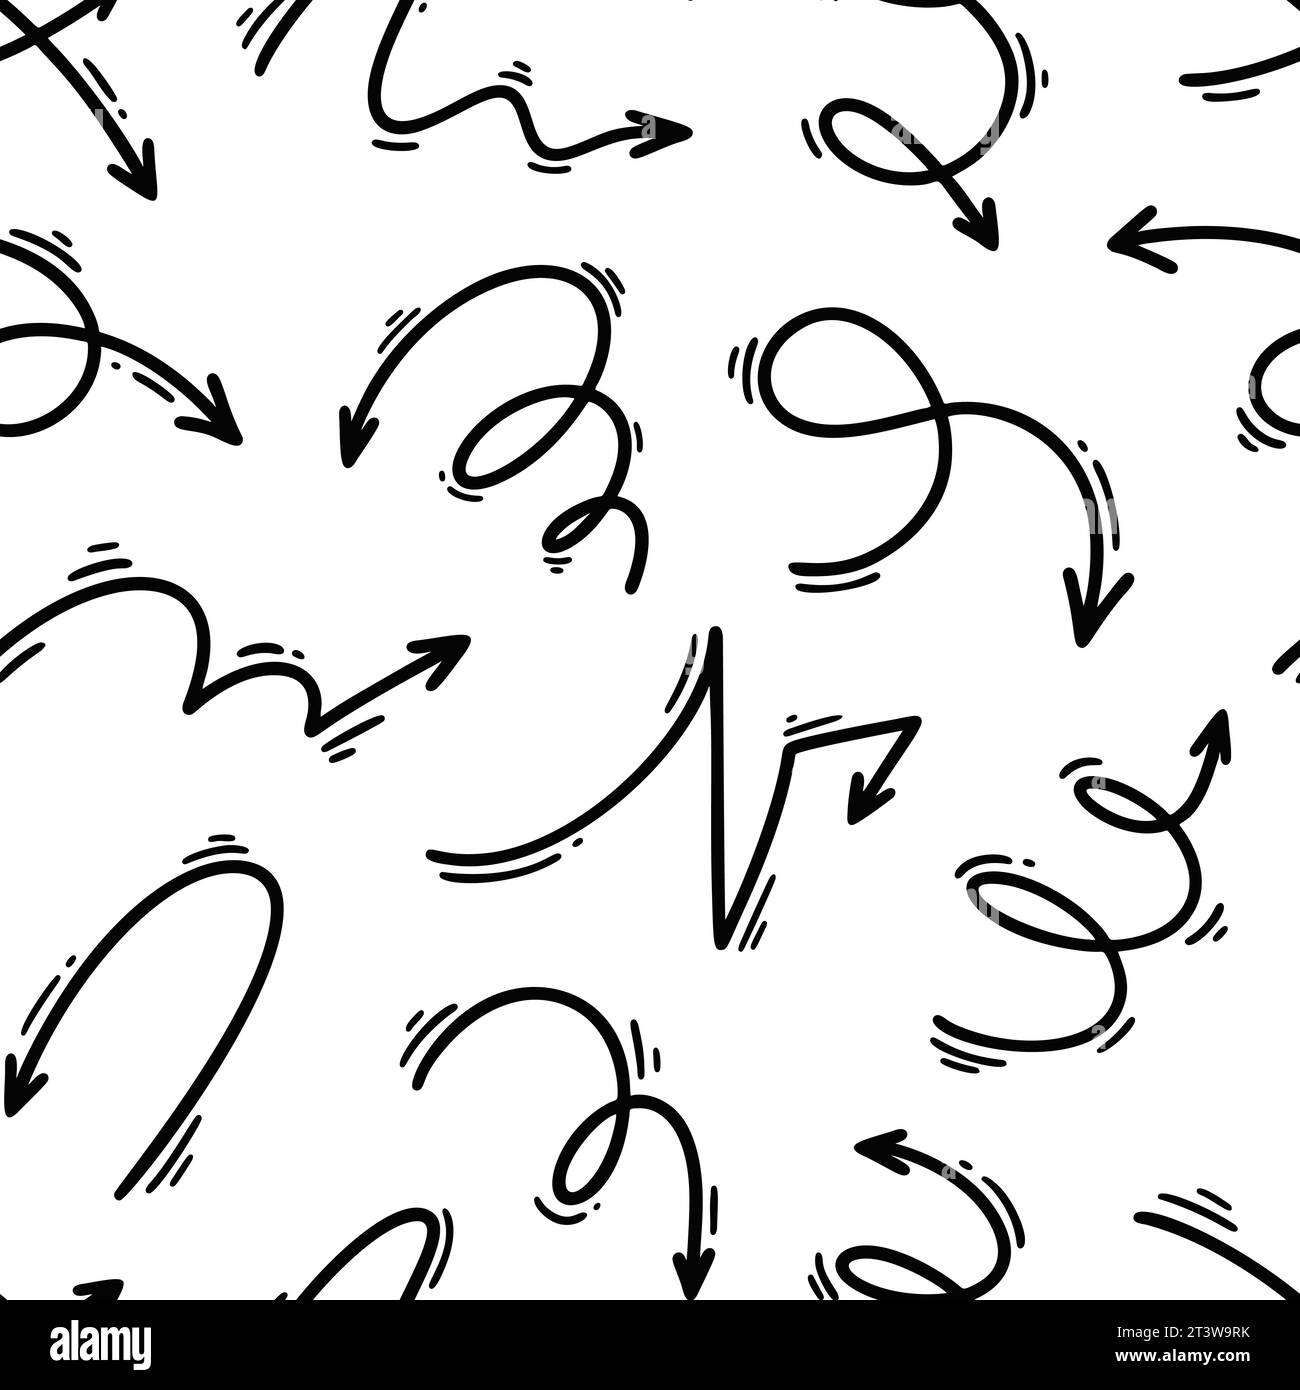 Doodle arrow seamless pattern. Squiggle, scribble, swoosh, swirl drawing. Vector illustration with manga and carton style design elements. Trendy chil Stock Vector